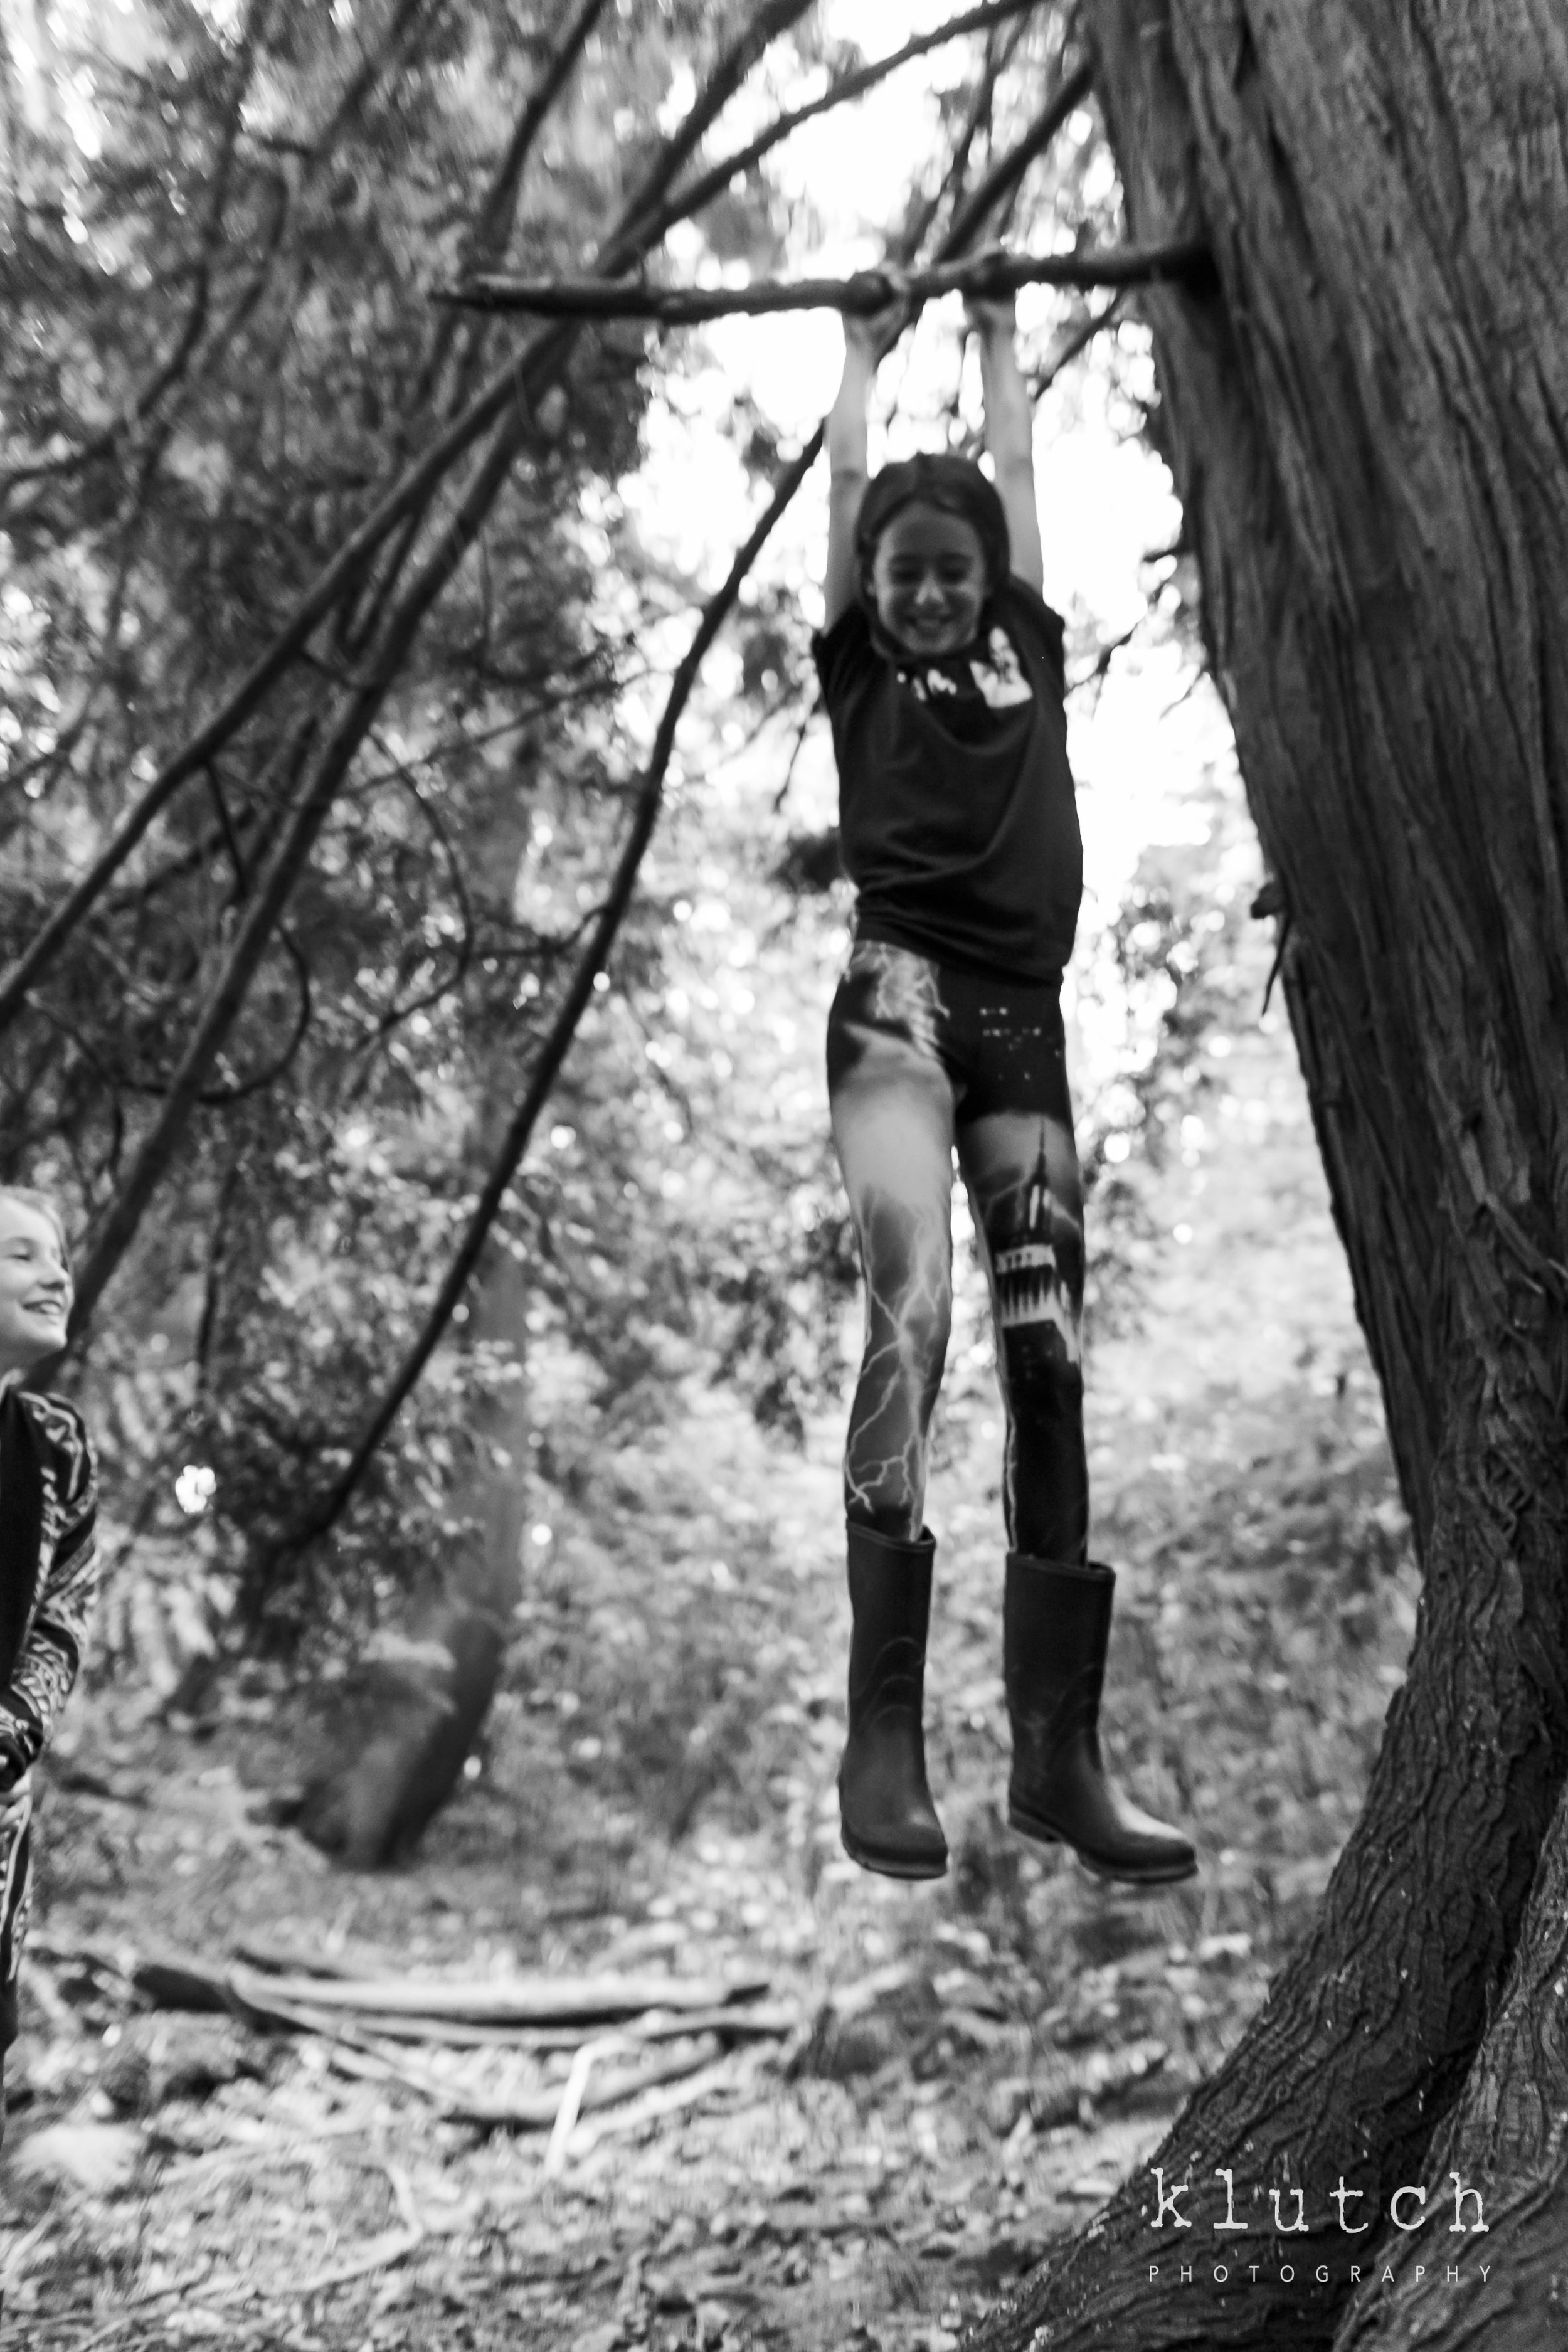 Girl dangling from tree branch